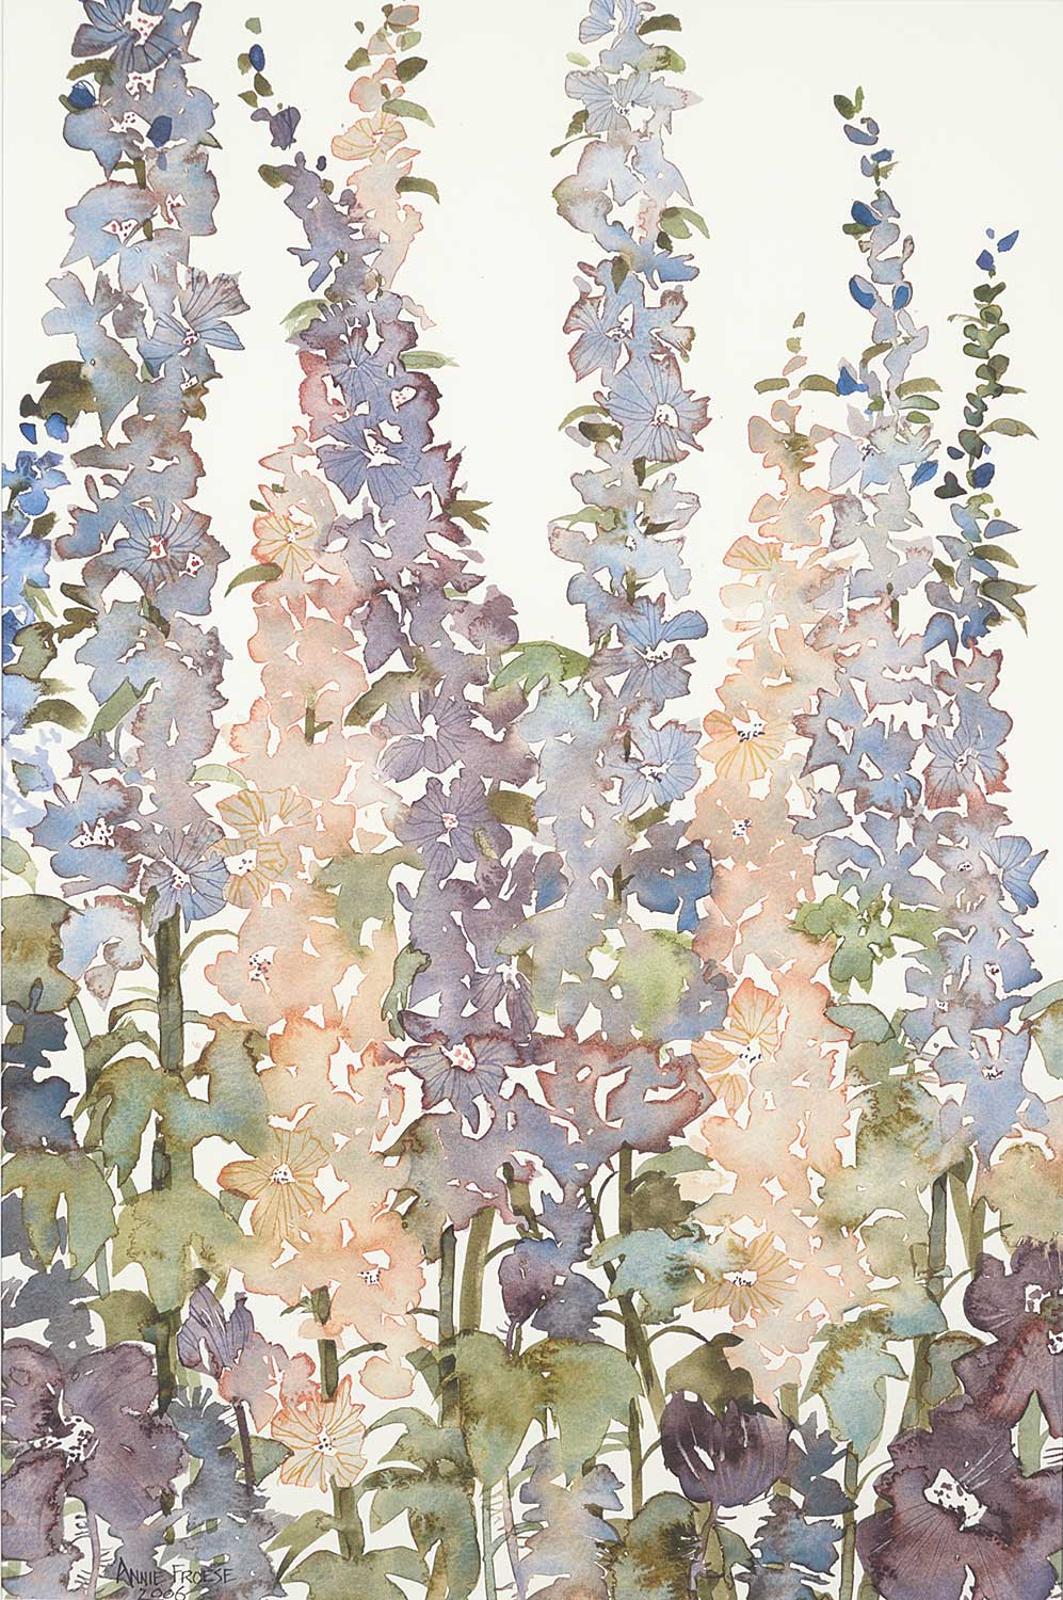 Annie Froese - Untitled - Delphiniums